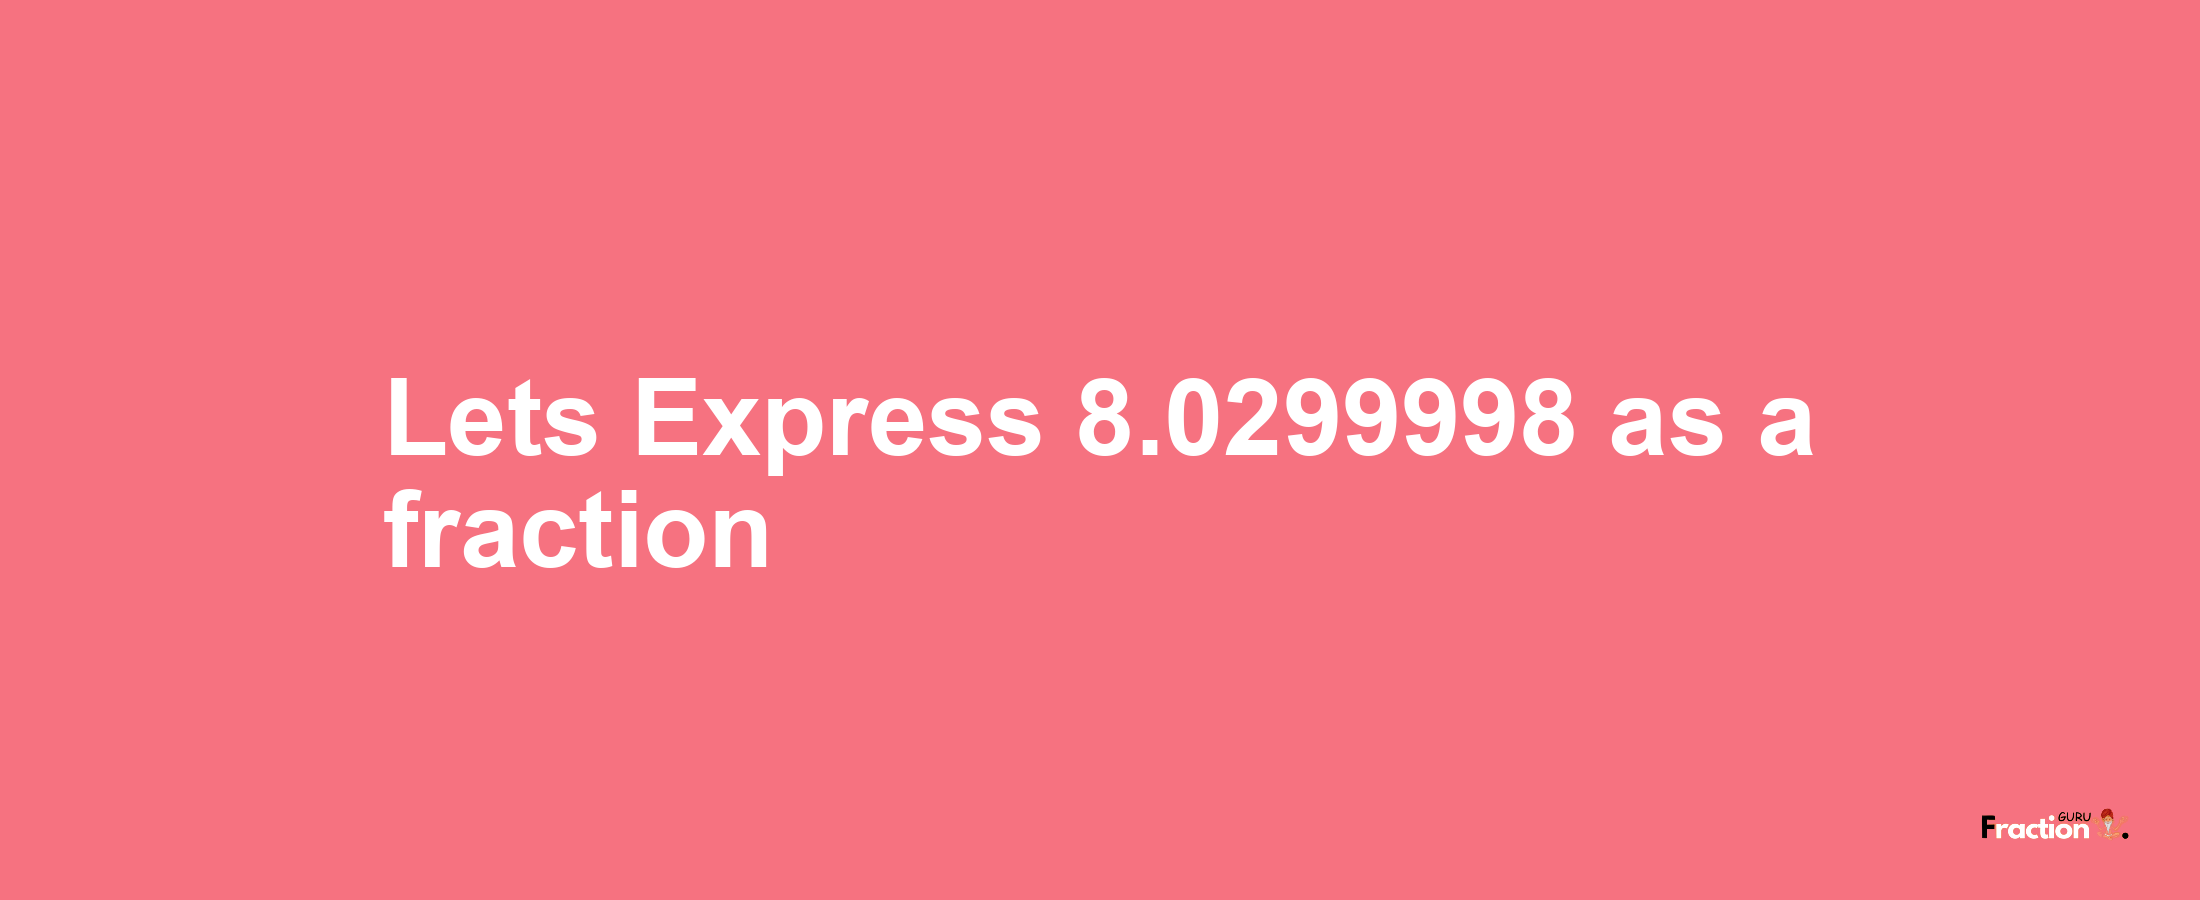 Lets Express 8.0299998 as afraction